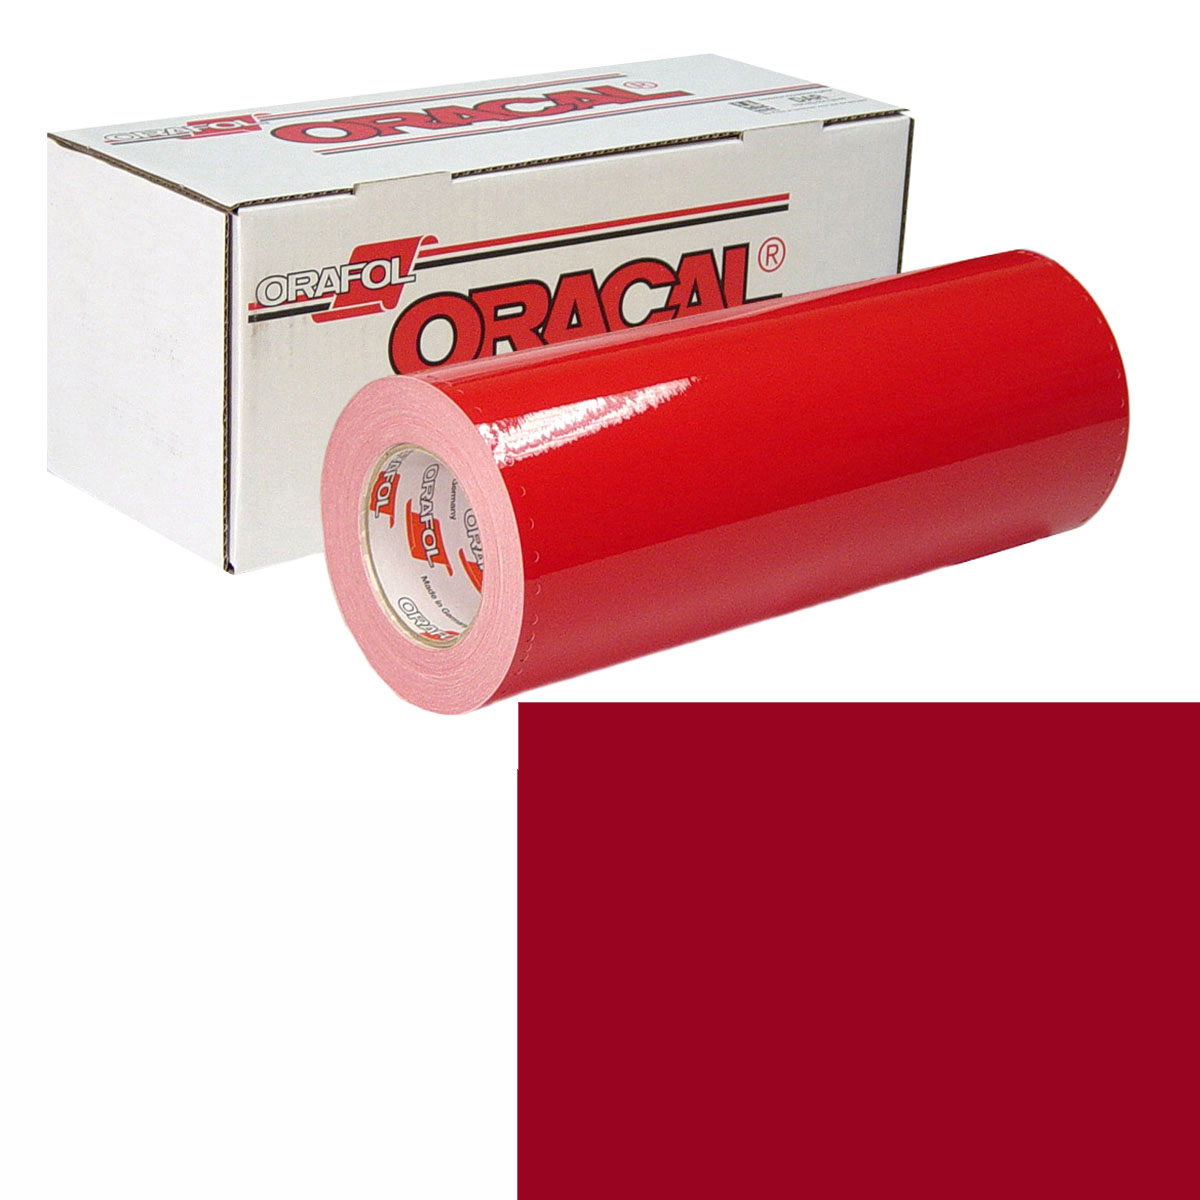 ORACAL 951 15in X 10yd 348 Scarlet Red